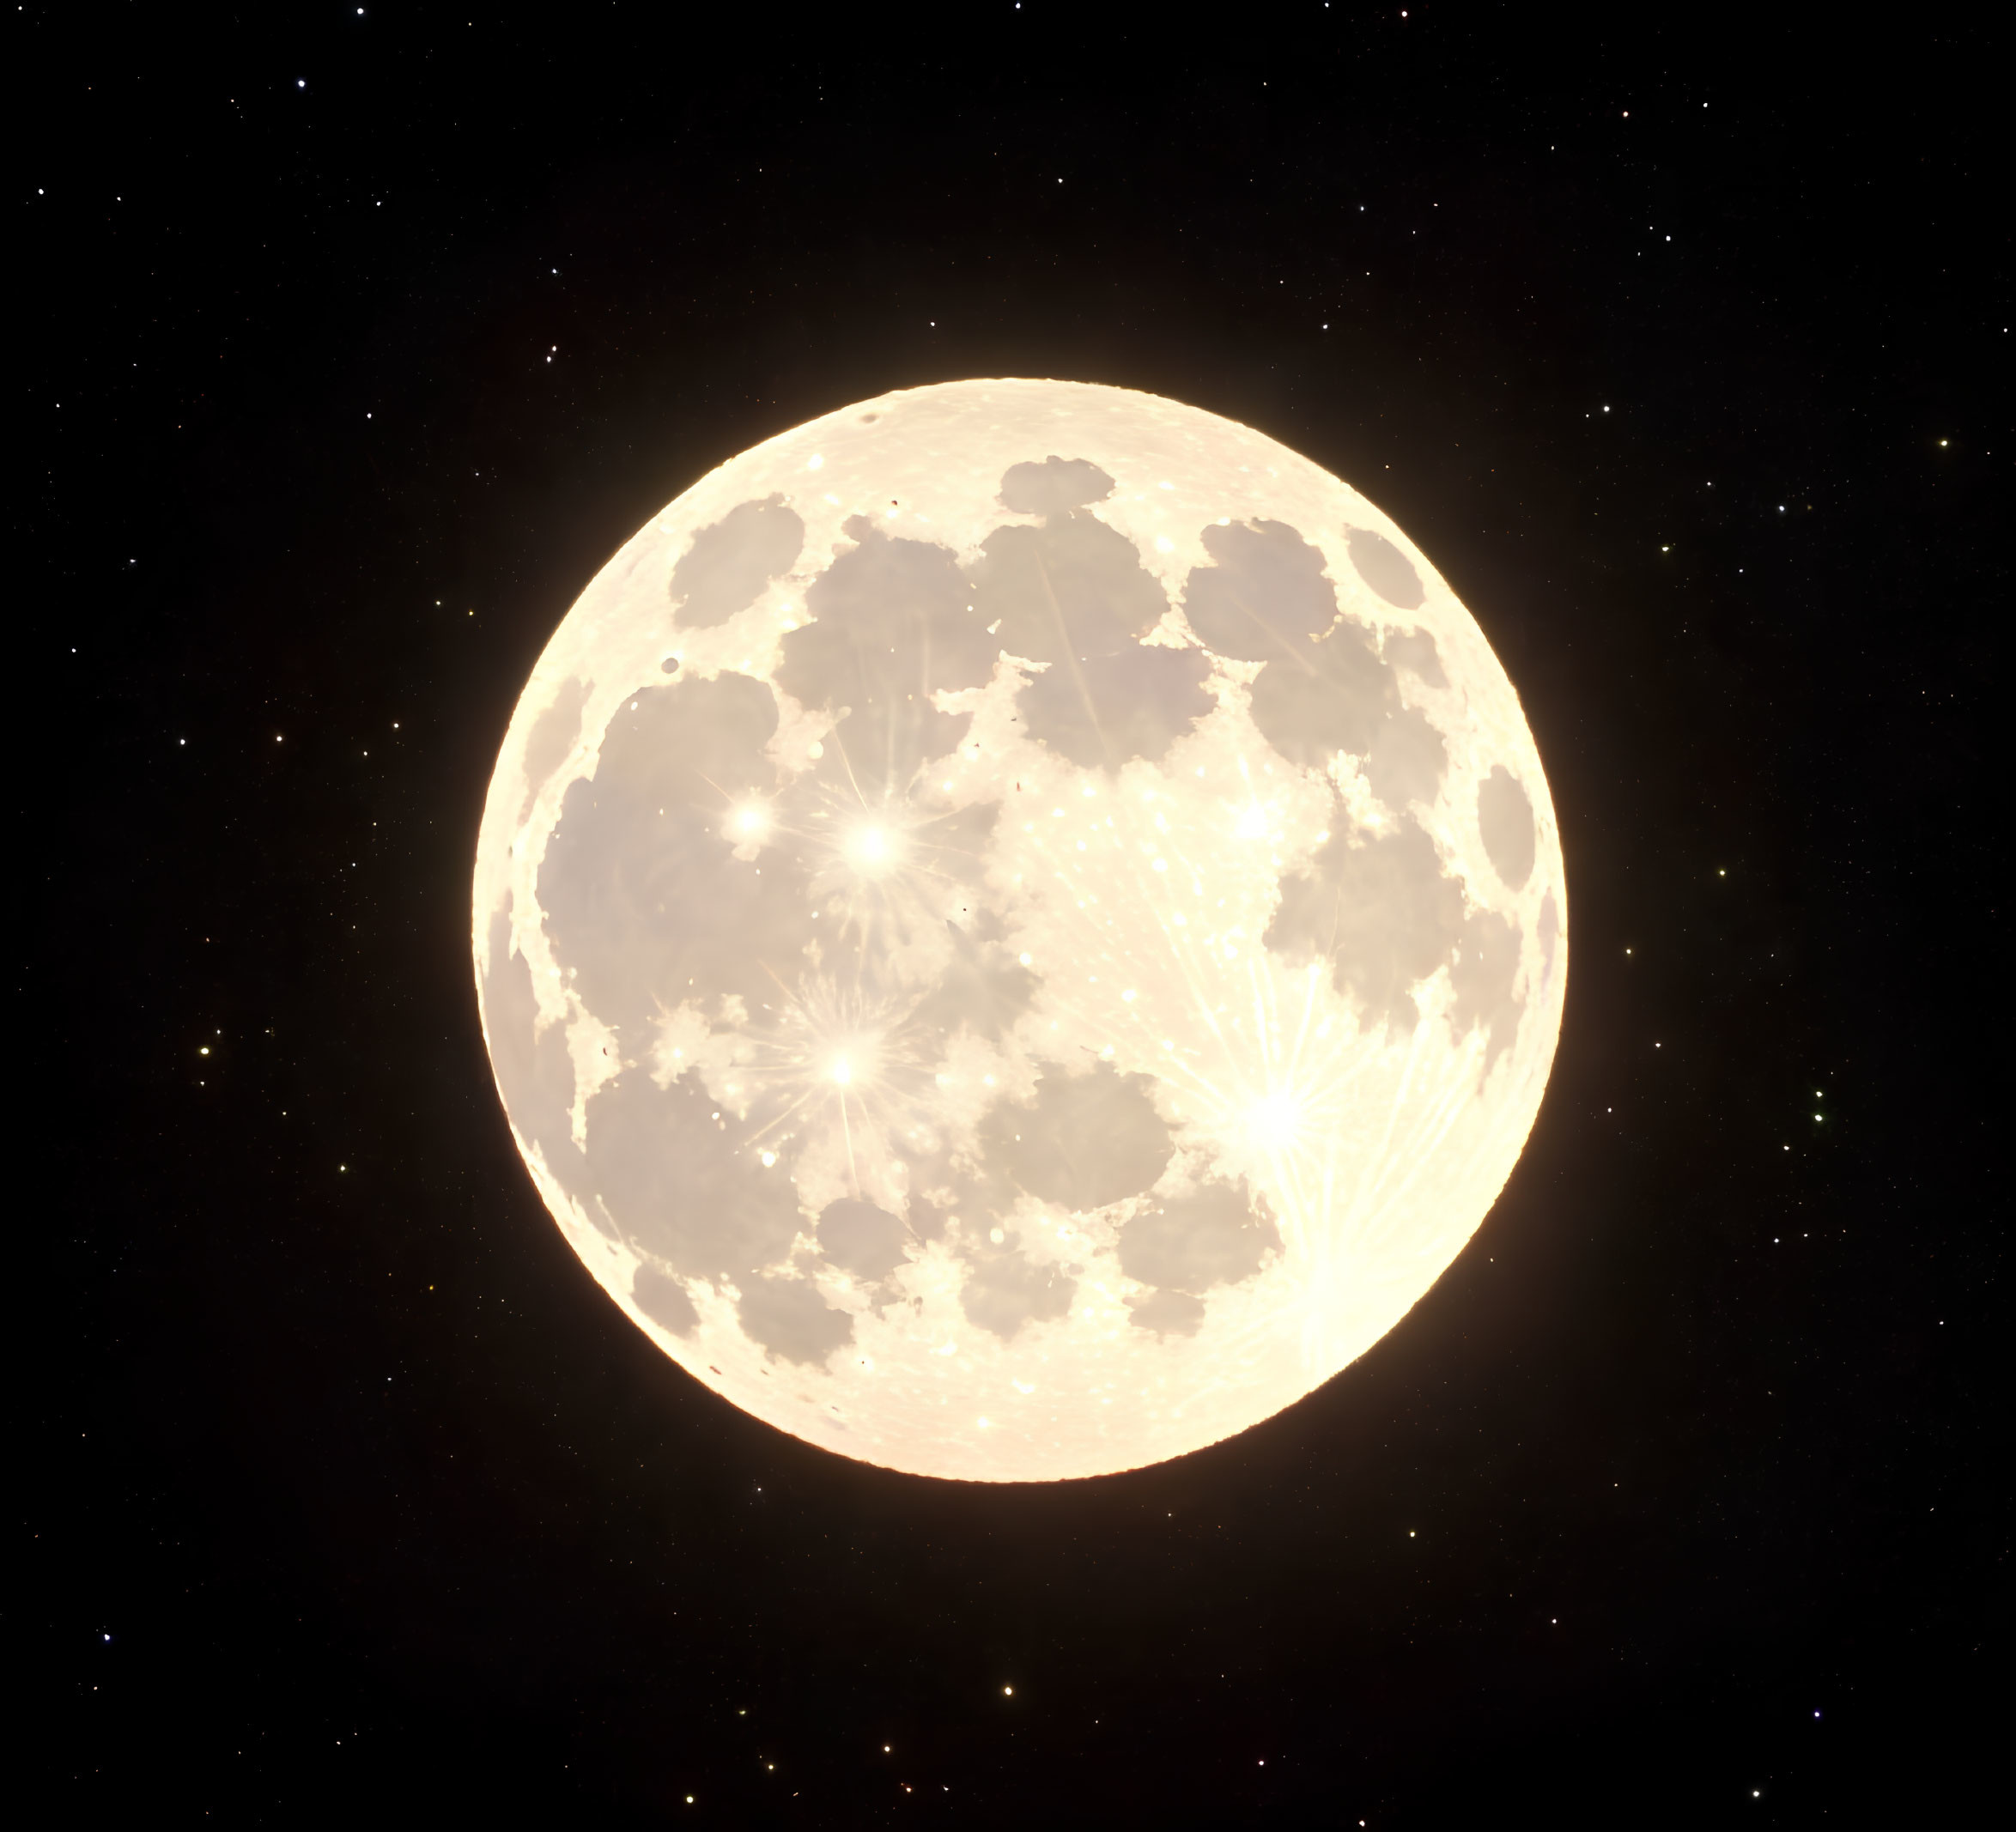 Detailed full moon with craters in starry night sky.